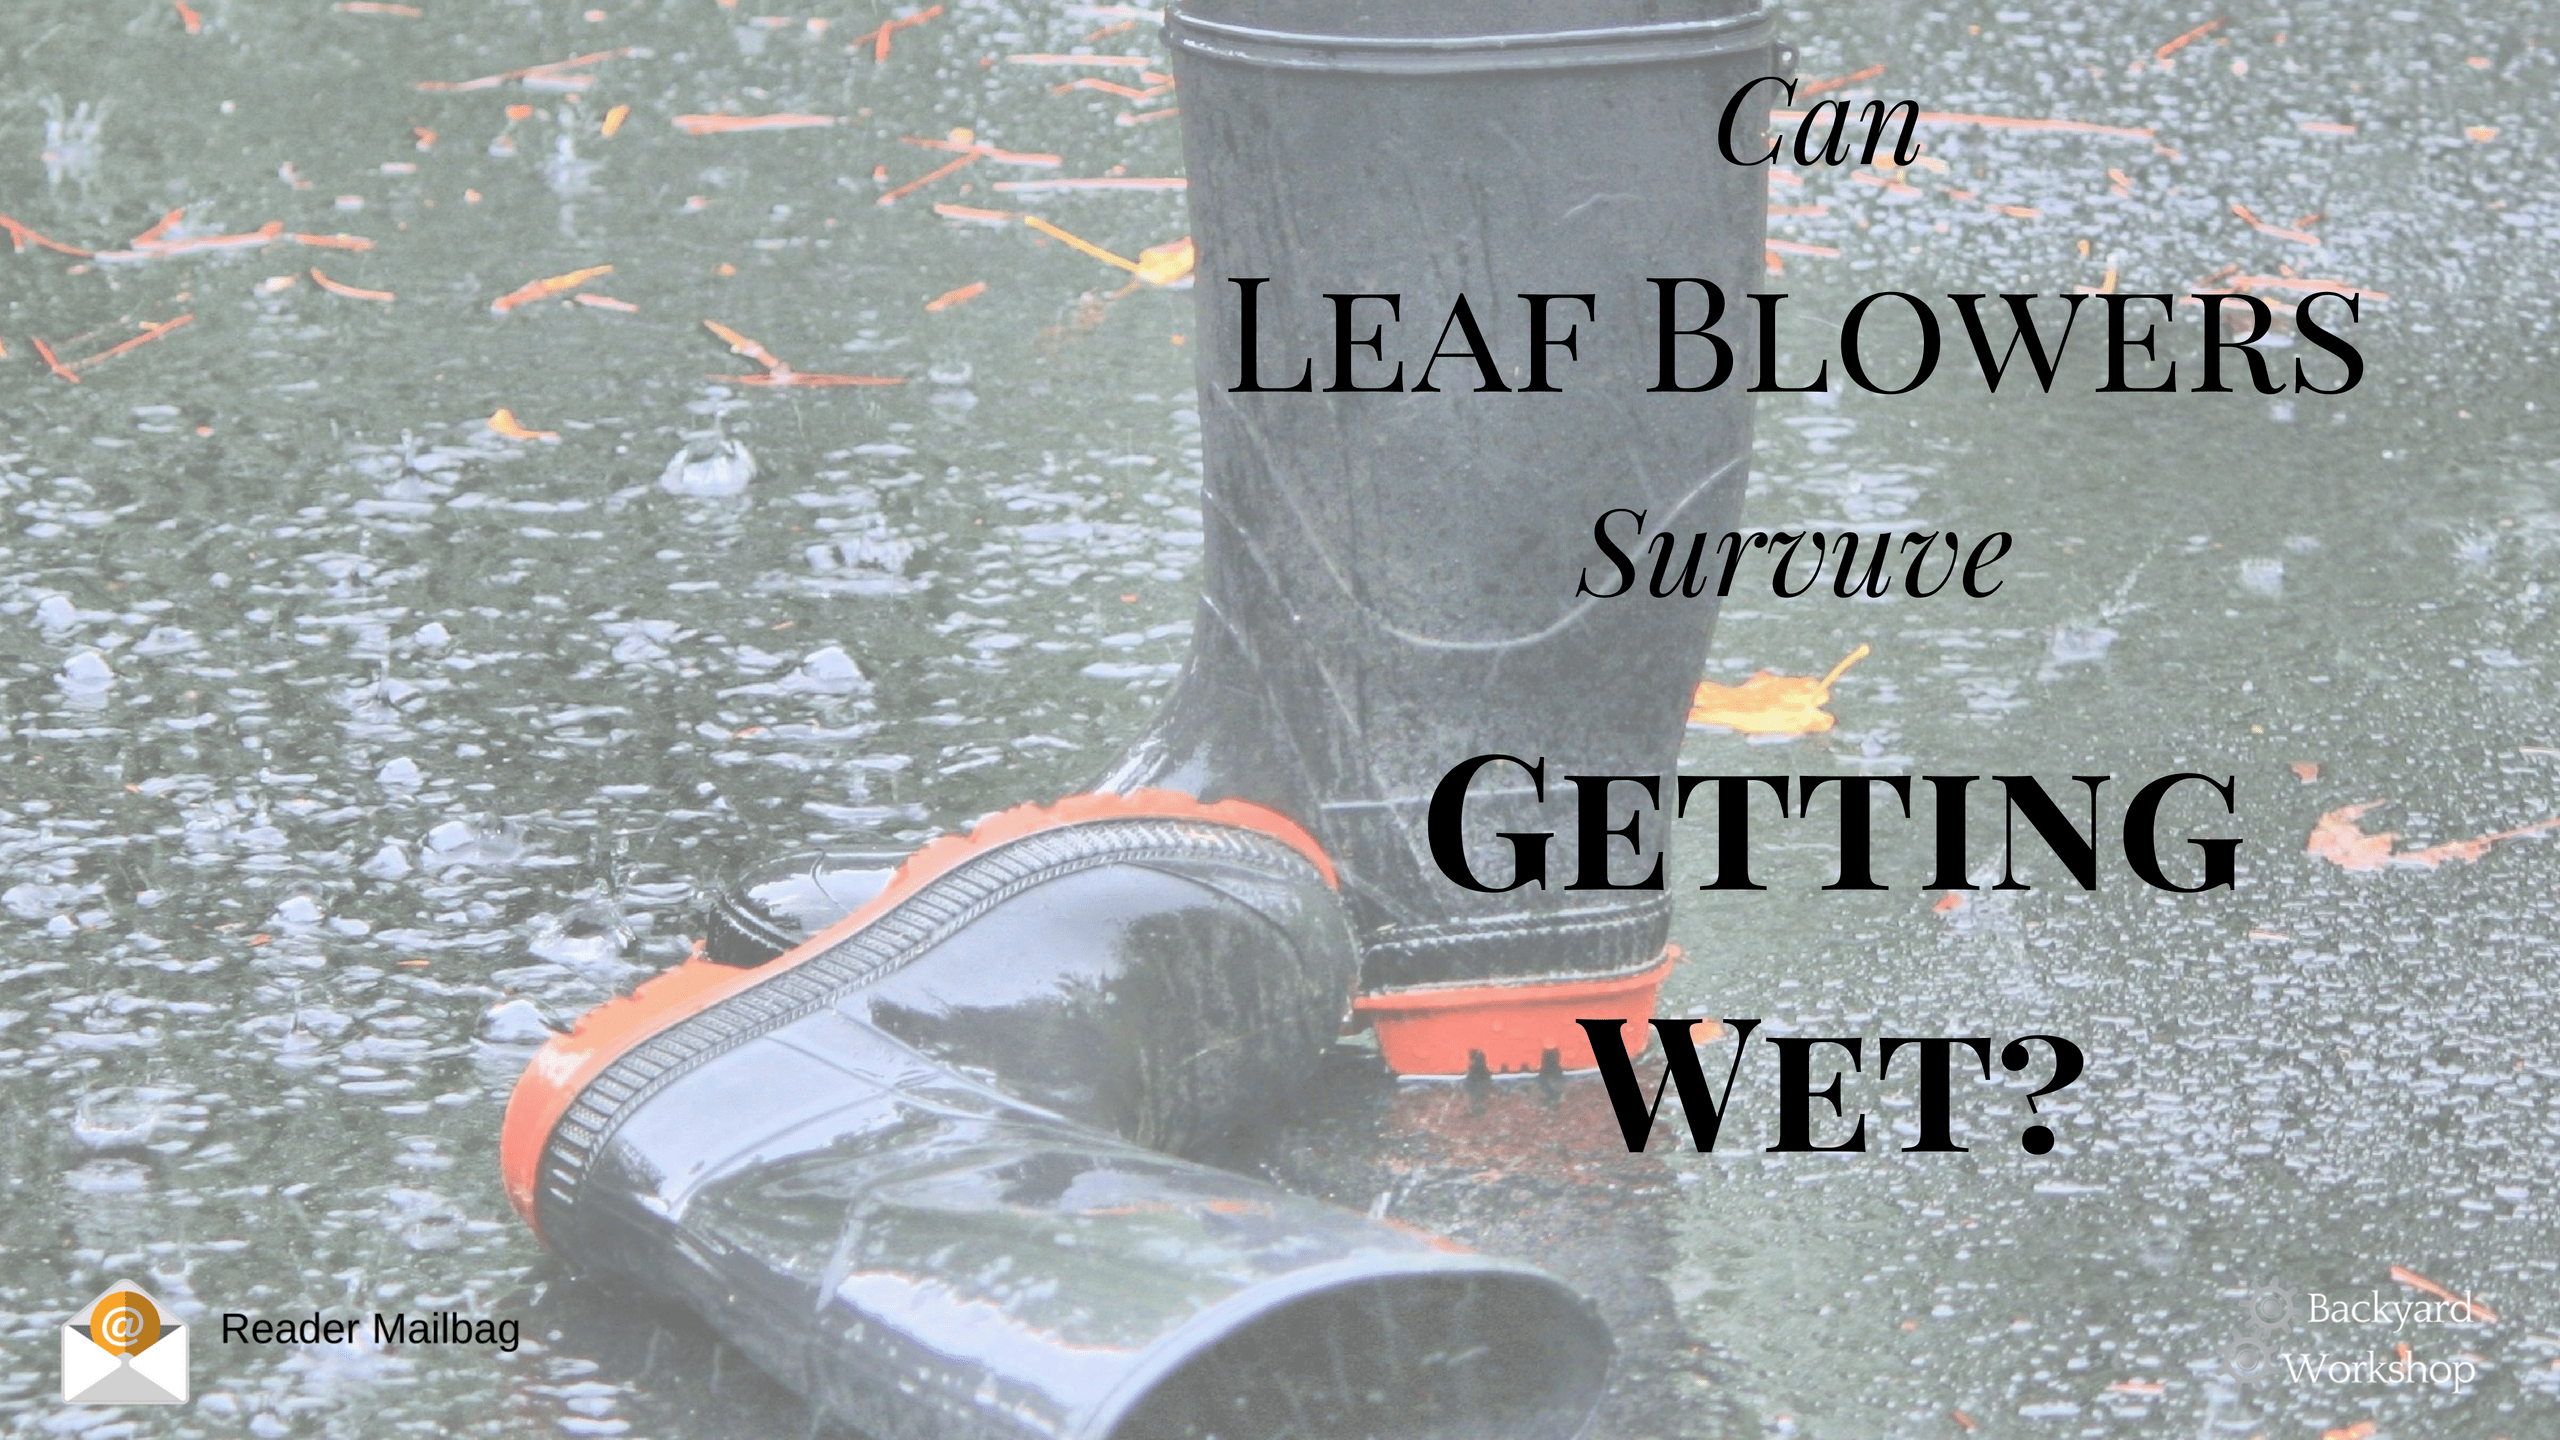 can leaf blowers get wet